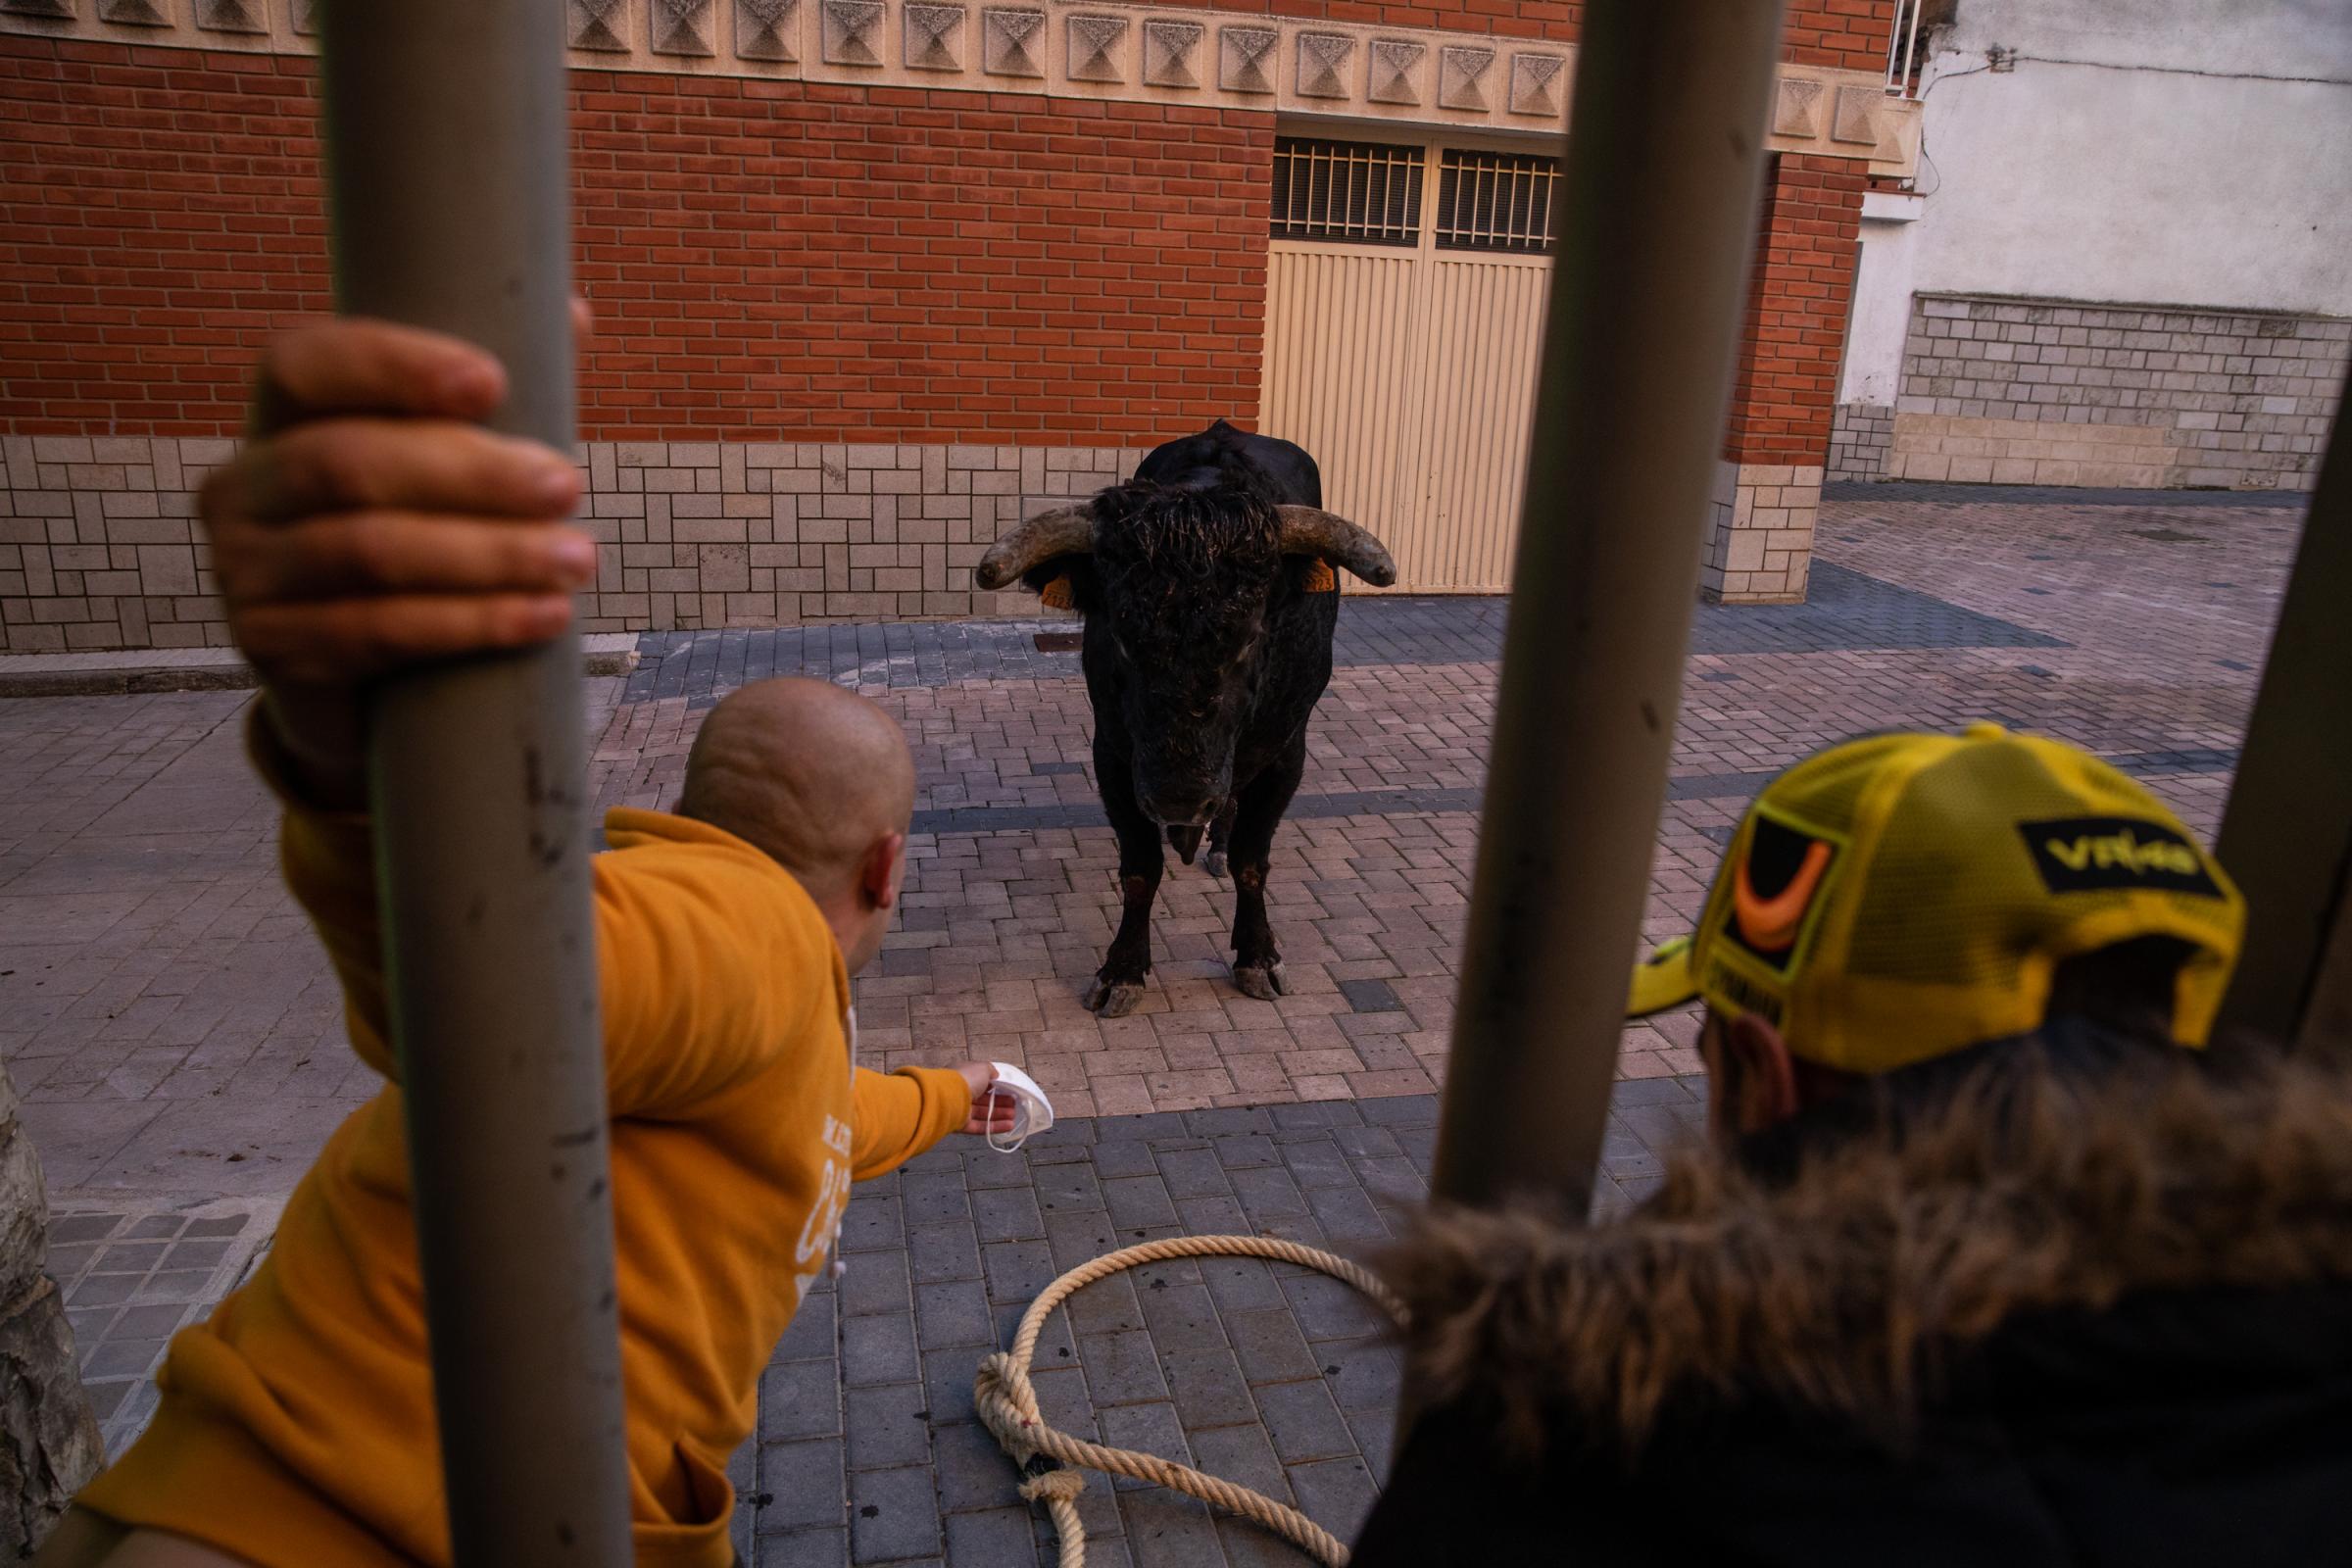 Spain's Dwindling Bullfighting Traditions - VALENCIA, SPAIN - DECEMBER 04: A young man tries to...